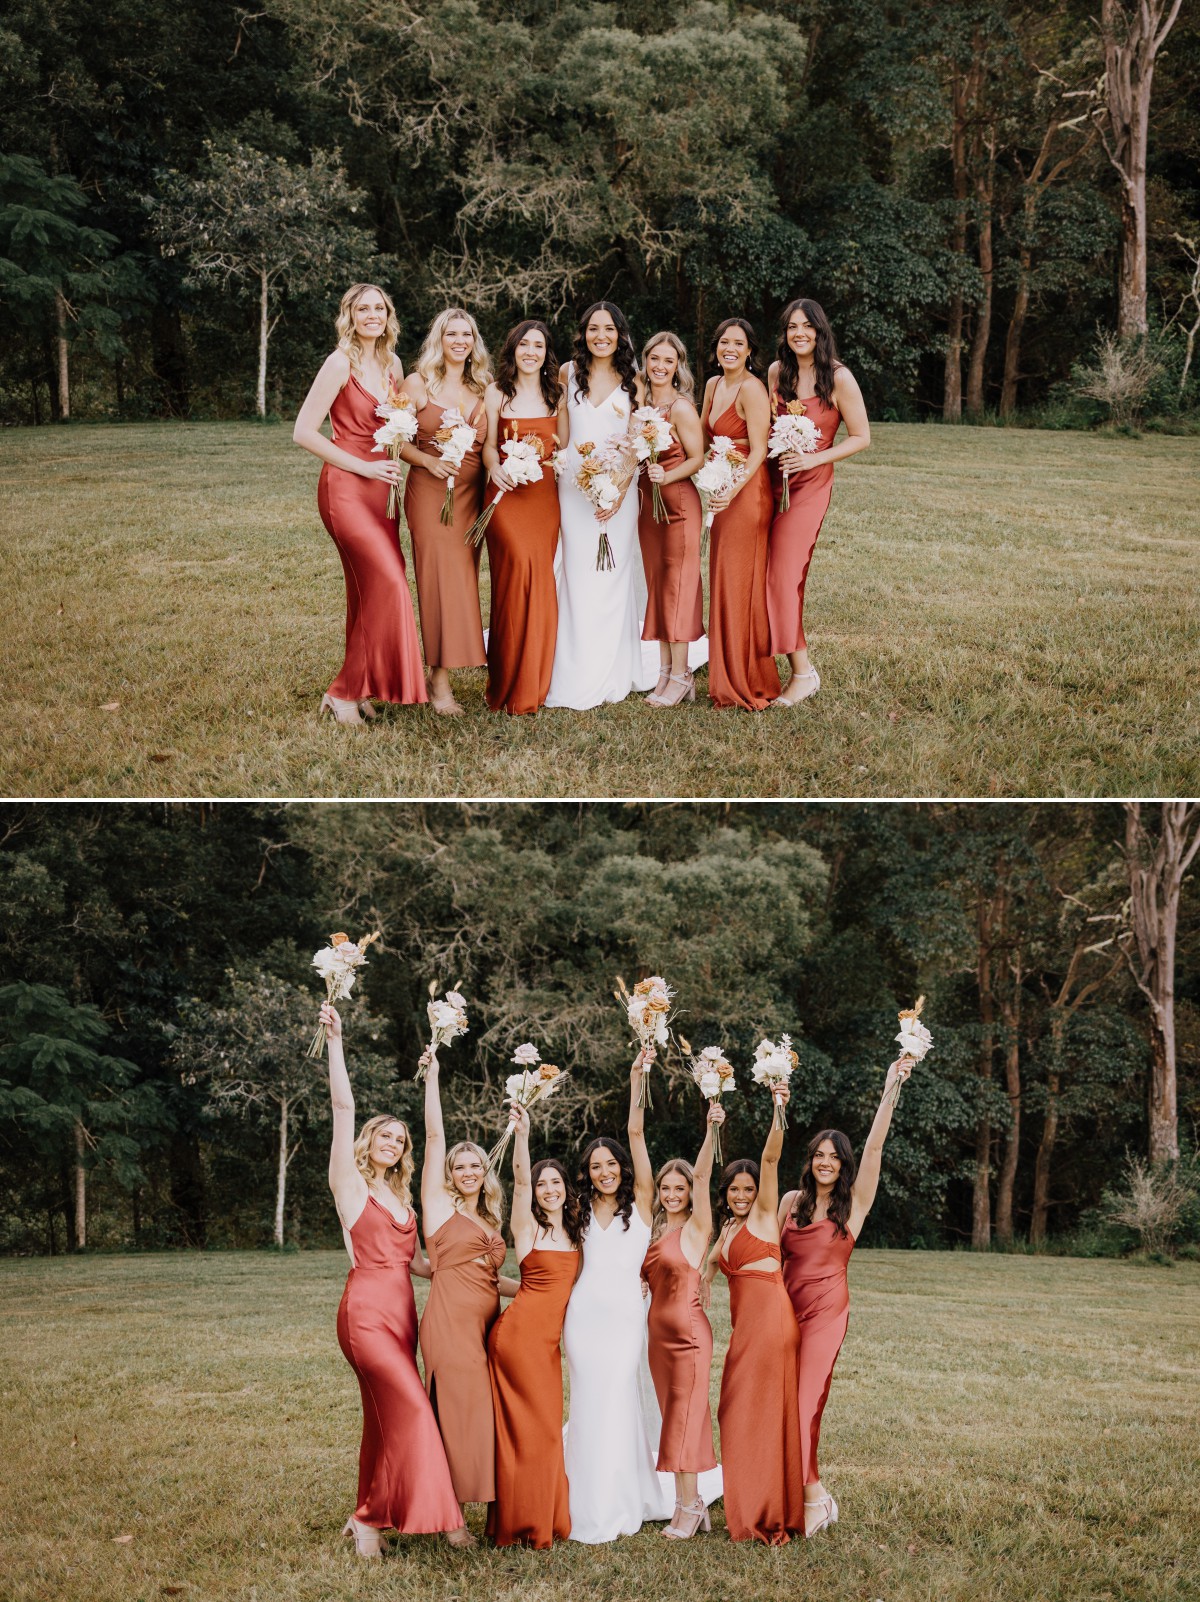 Bride with her bridesmaids in warm rustic tone dresses